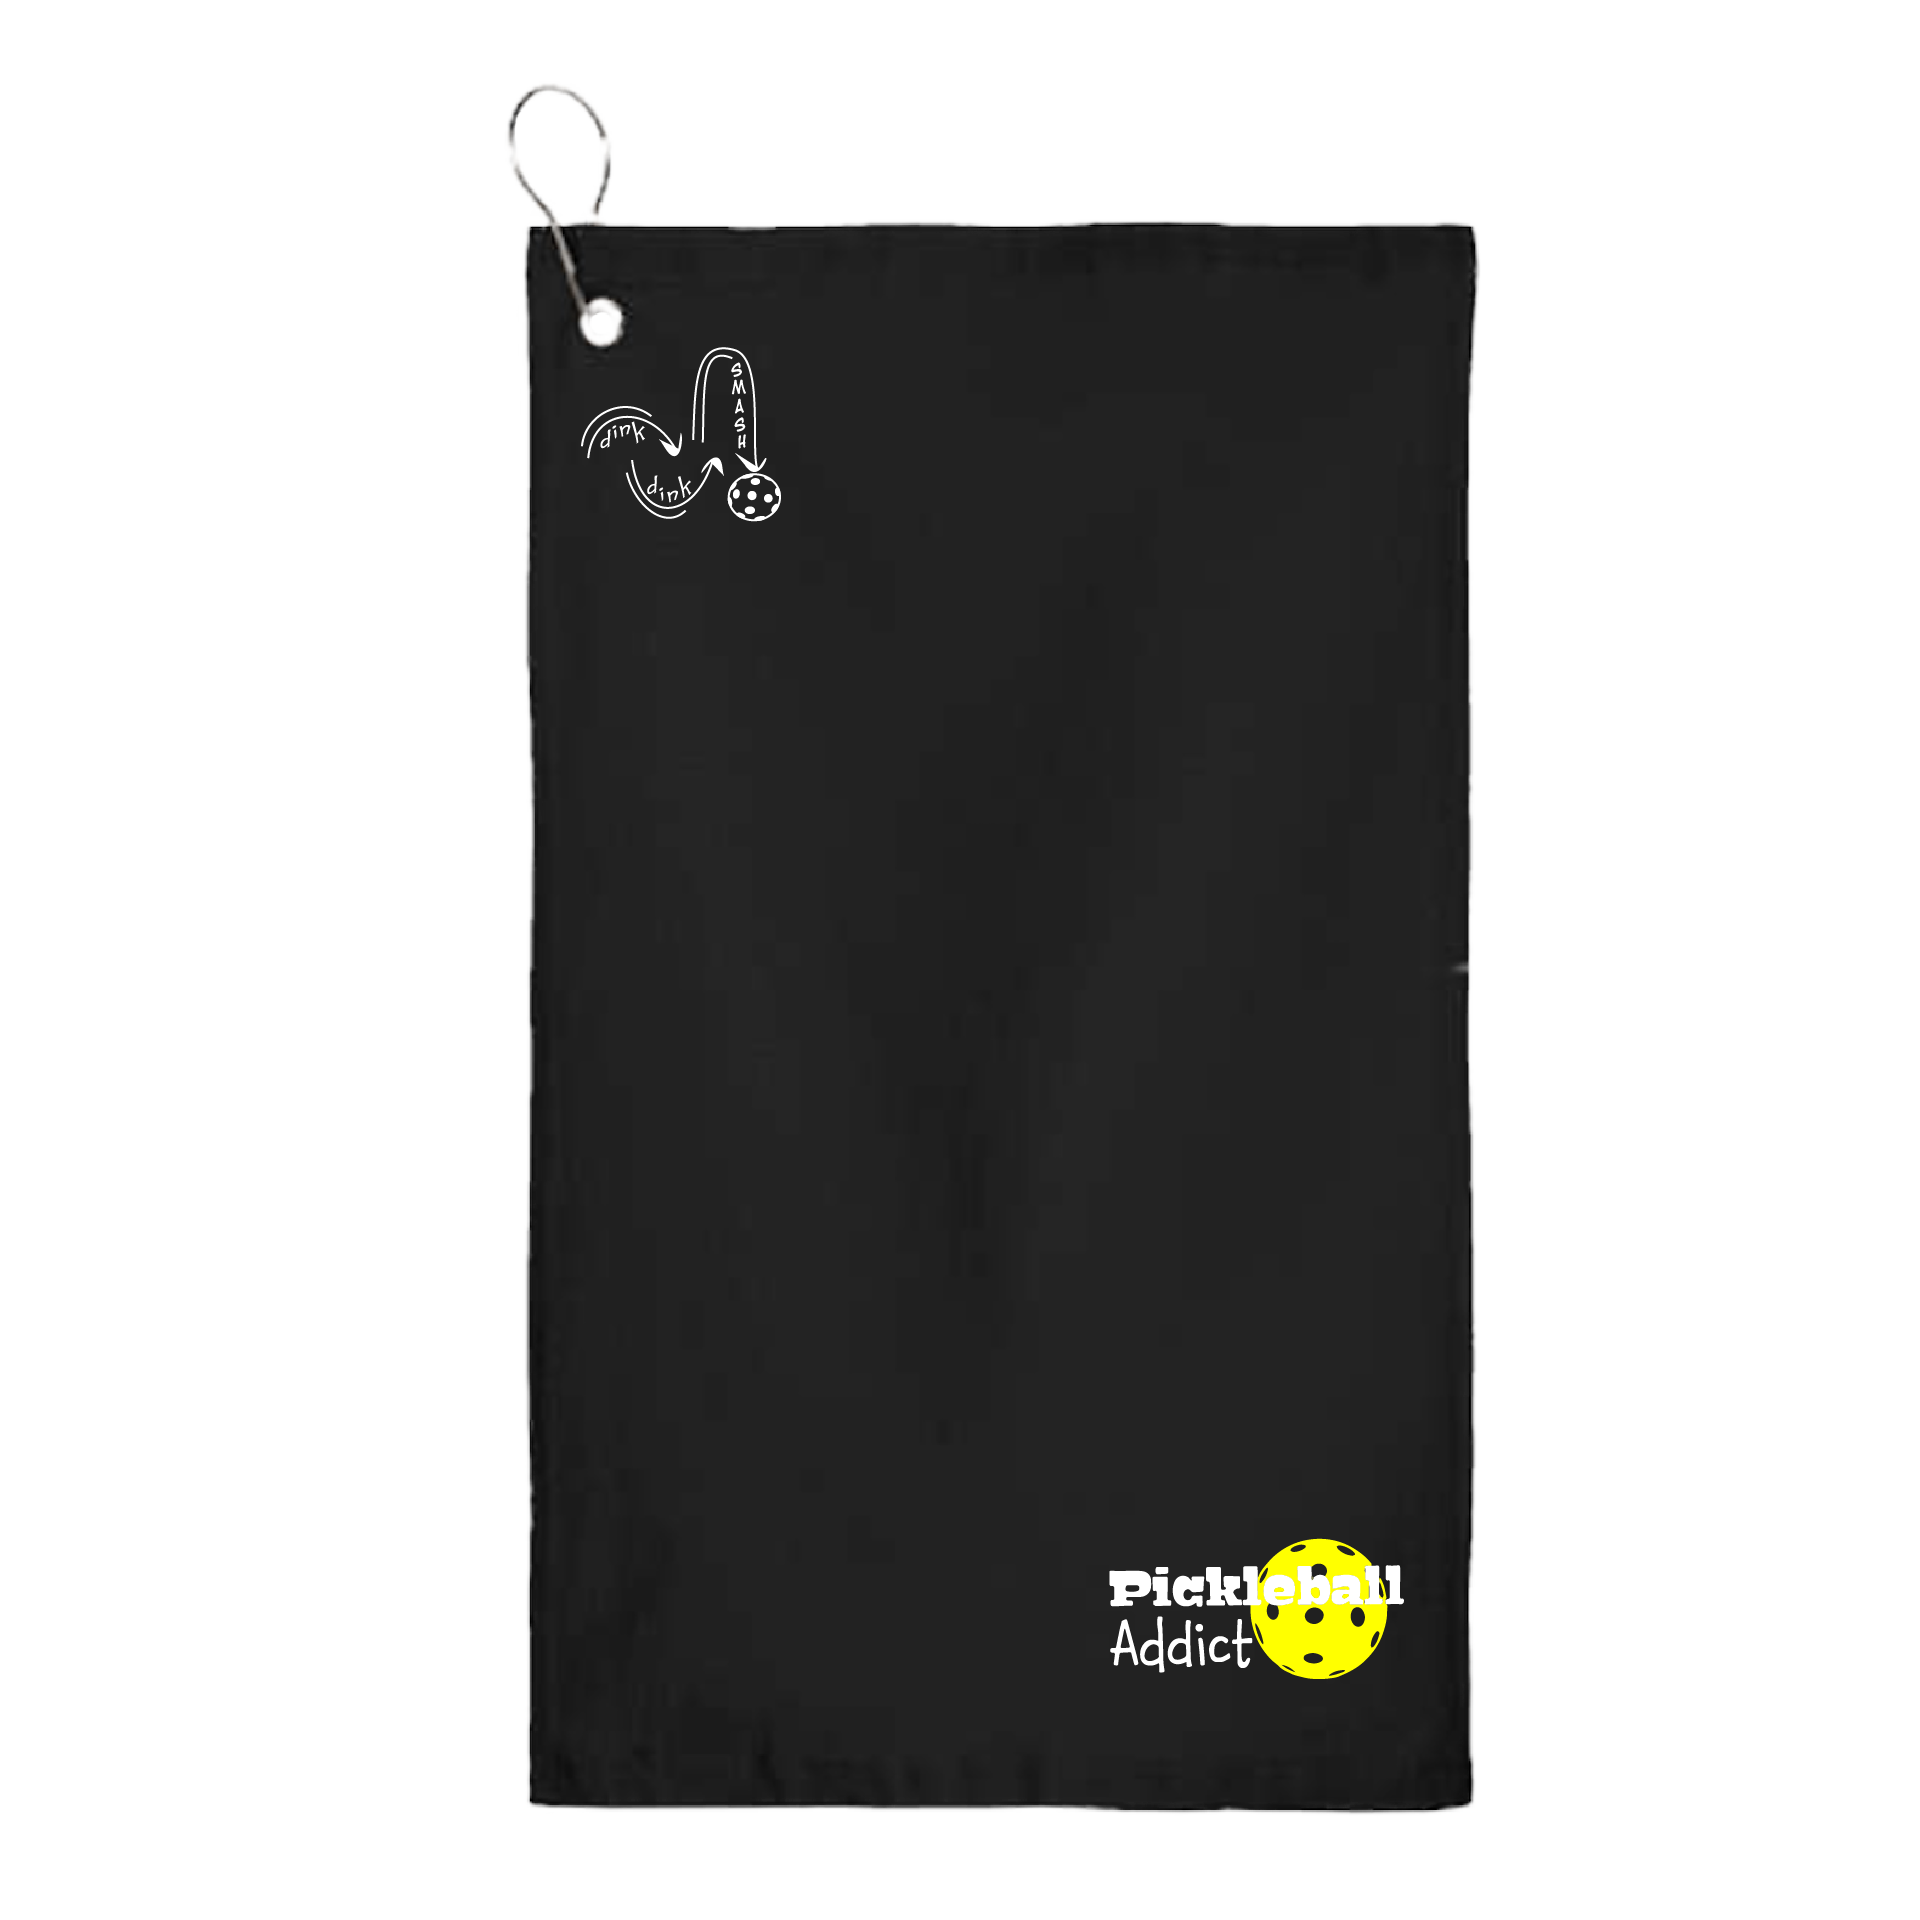 This Pickleball Addict towel is crafted with cotton terry velour for optimal performance. It features grommets, hooks, and hemmed edges for added durability. It's perfect for completing your pickleball gear, and an ideal gift for friends and tournaments. The towel is designed to be both absorbent and lightweight, so you can remain dry and comfortable while you play.